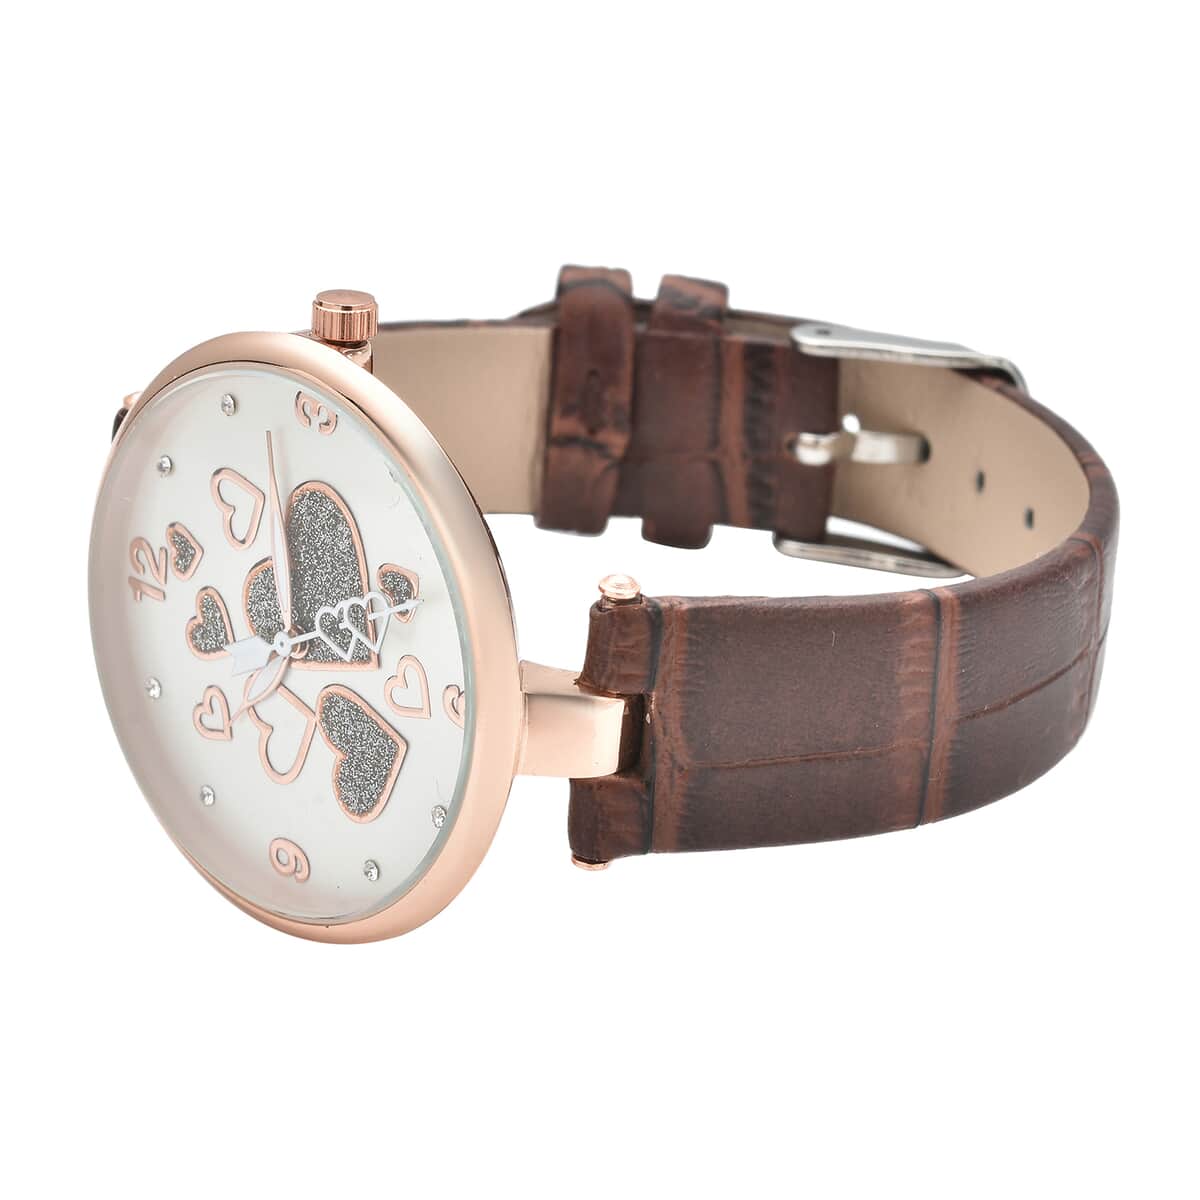 Strada Austrian Crystal Japanese Movement Watch in Rosetone with Brown Vegan Leather Strap image number 4